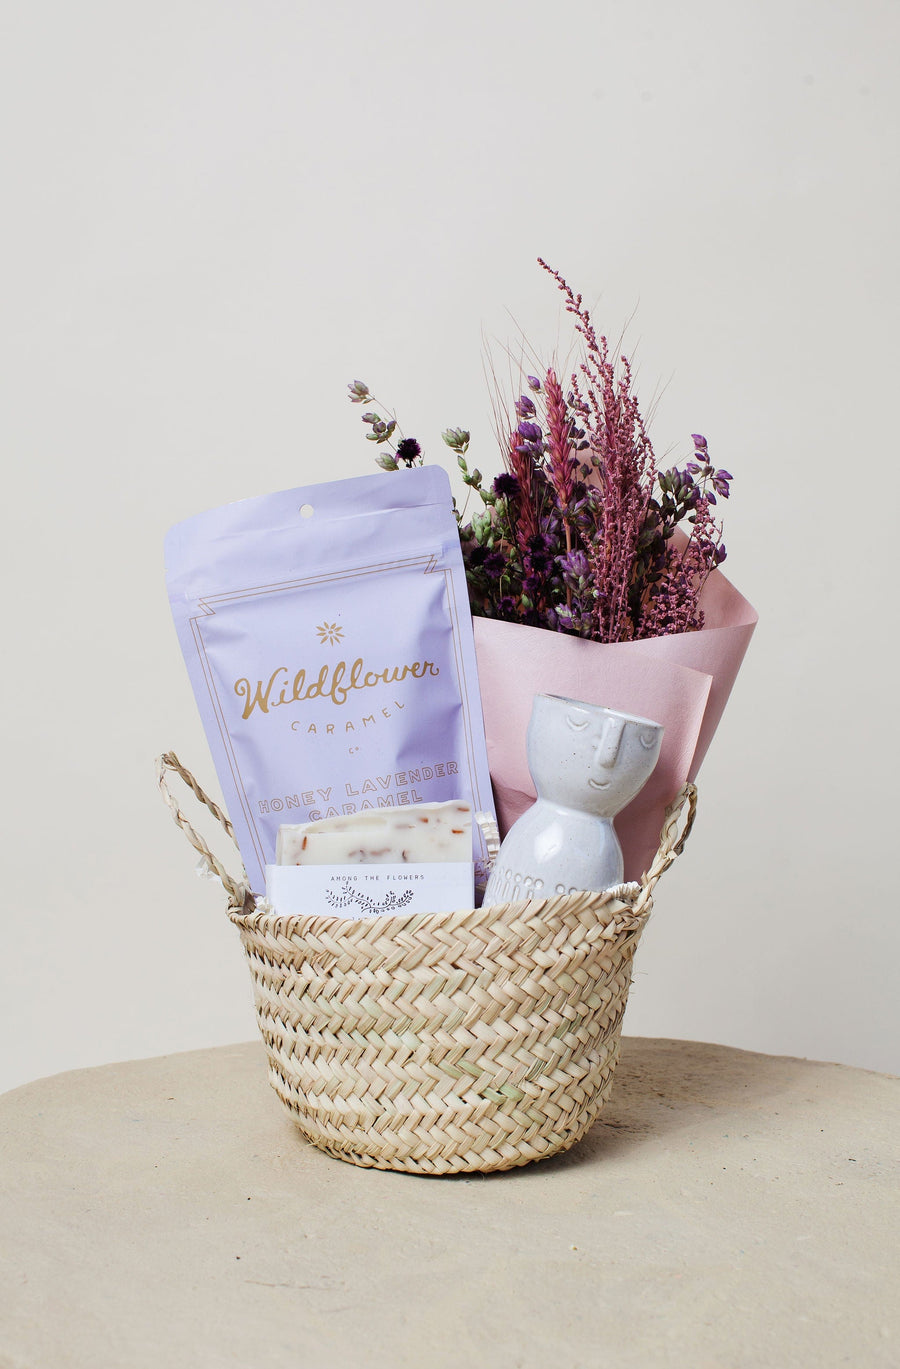 Idlewild Floral Co. Gift Giving Farmhouse Gift Basket